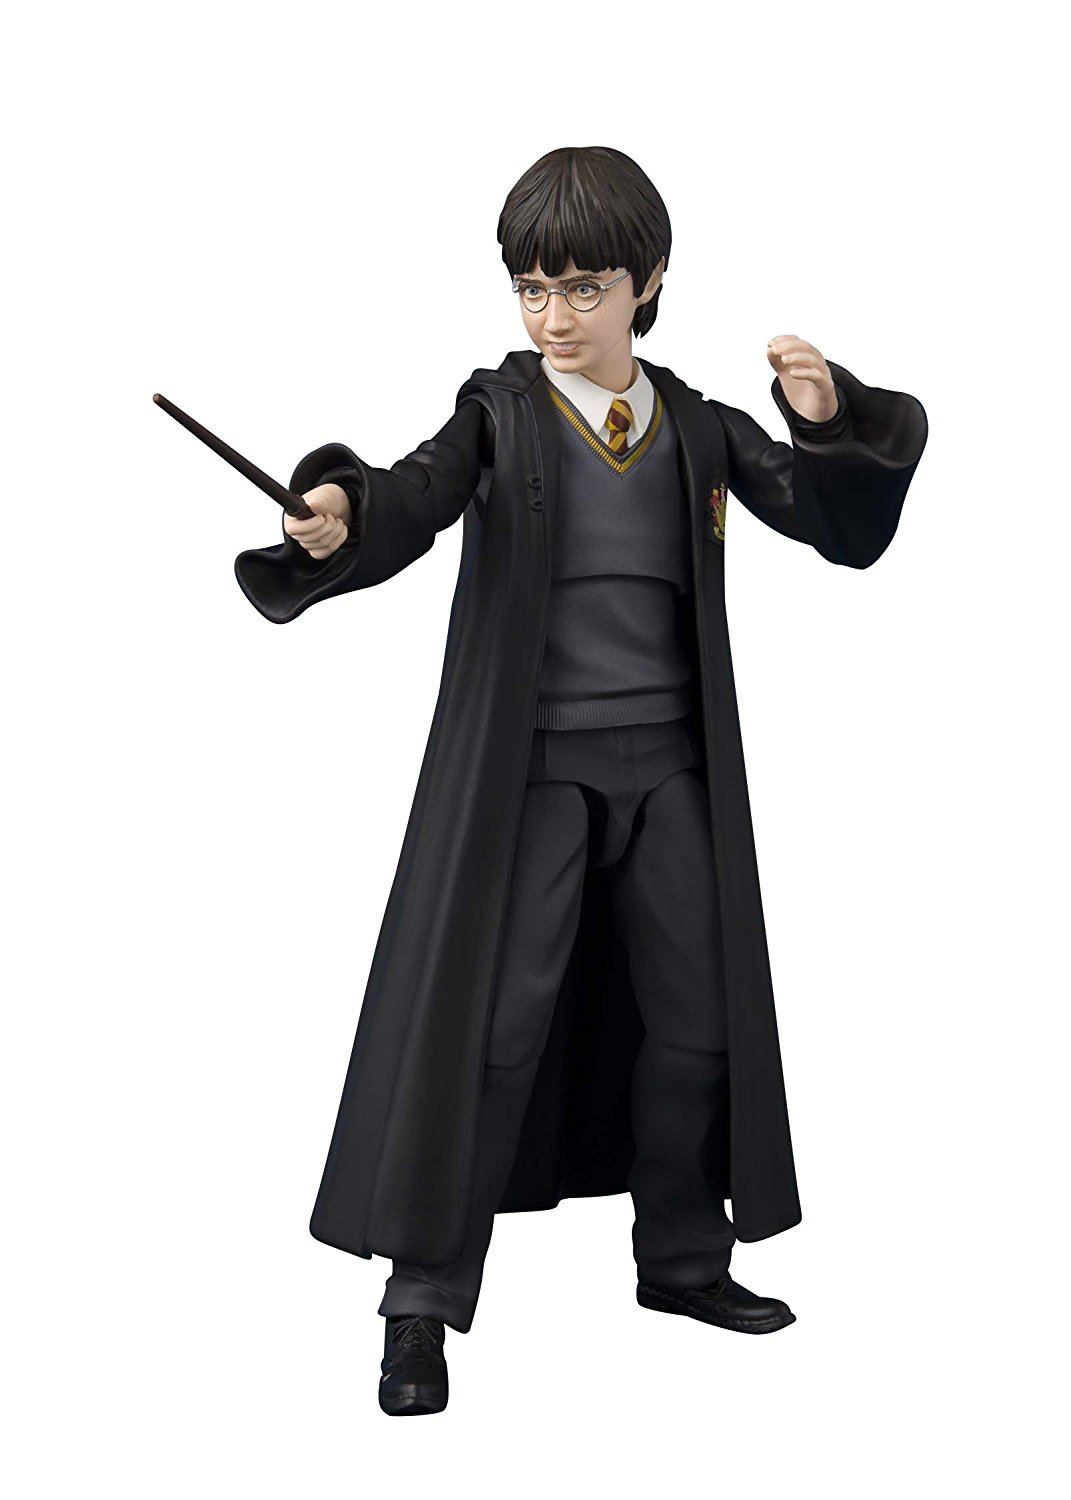 S.H.FIGUARTS HARRY POTTER AND THE PHILOSOPHER'S STONE: HARRY POTTER Tamashii (Bandai Toys)